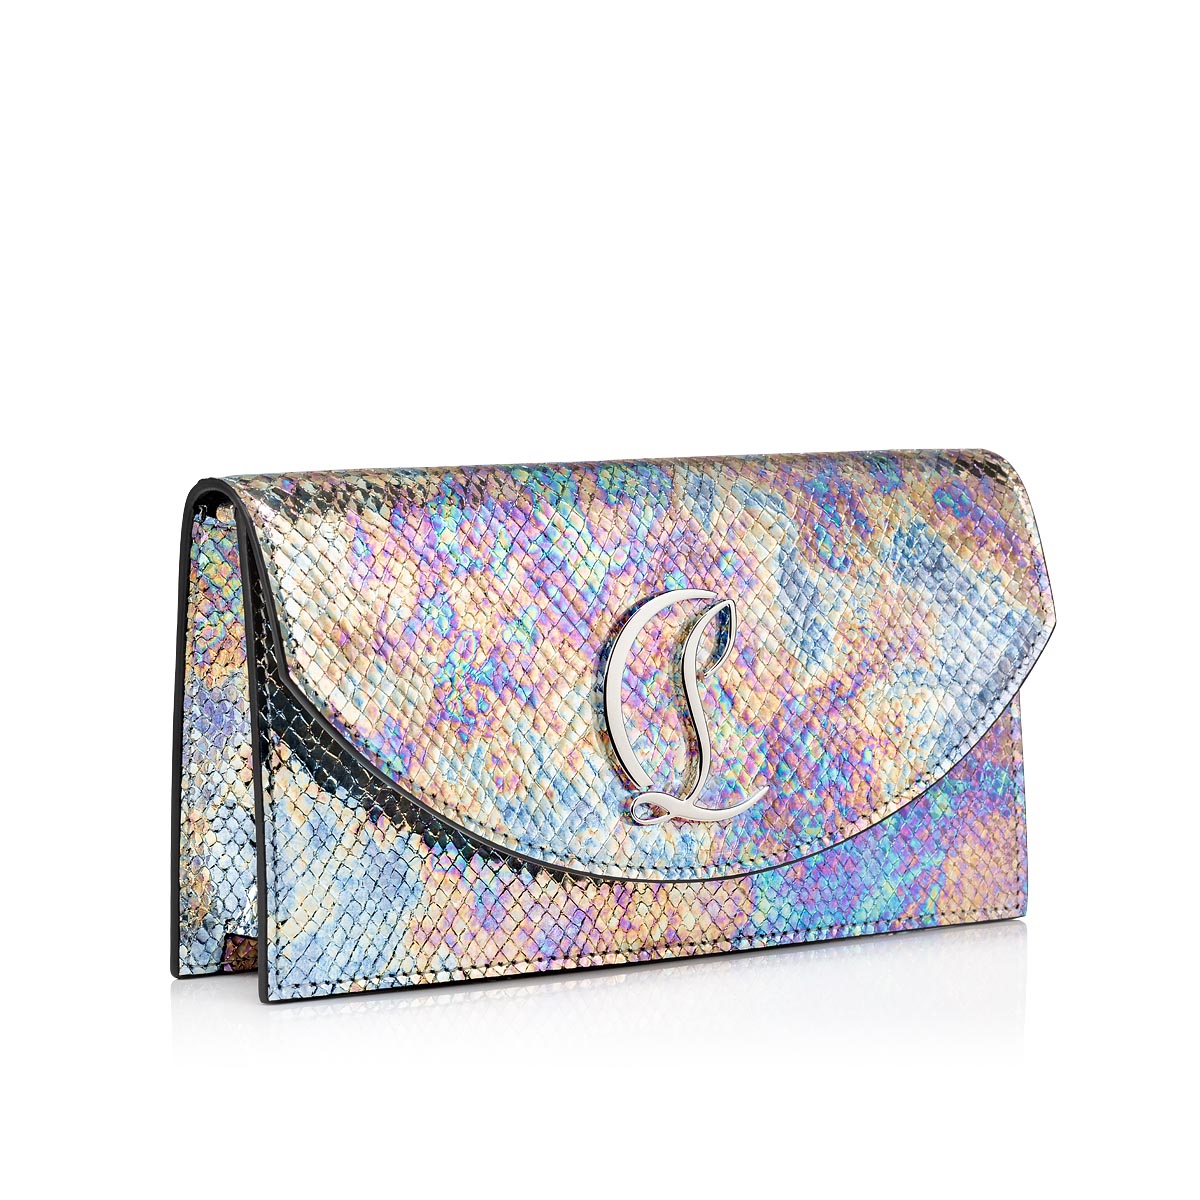 Louis Vuitton's Iridescent Bags Are Here To Add Extra Sparkle